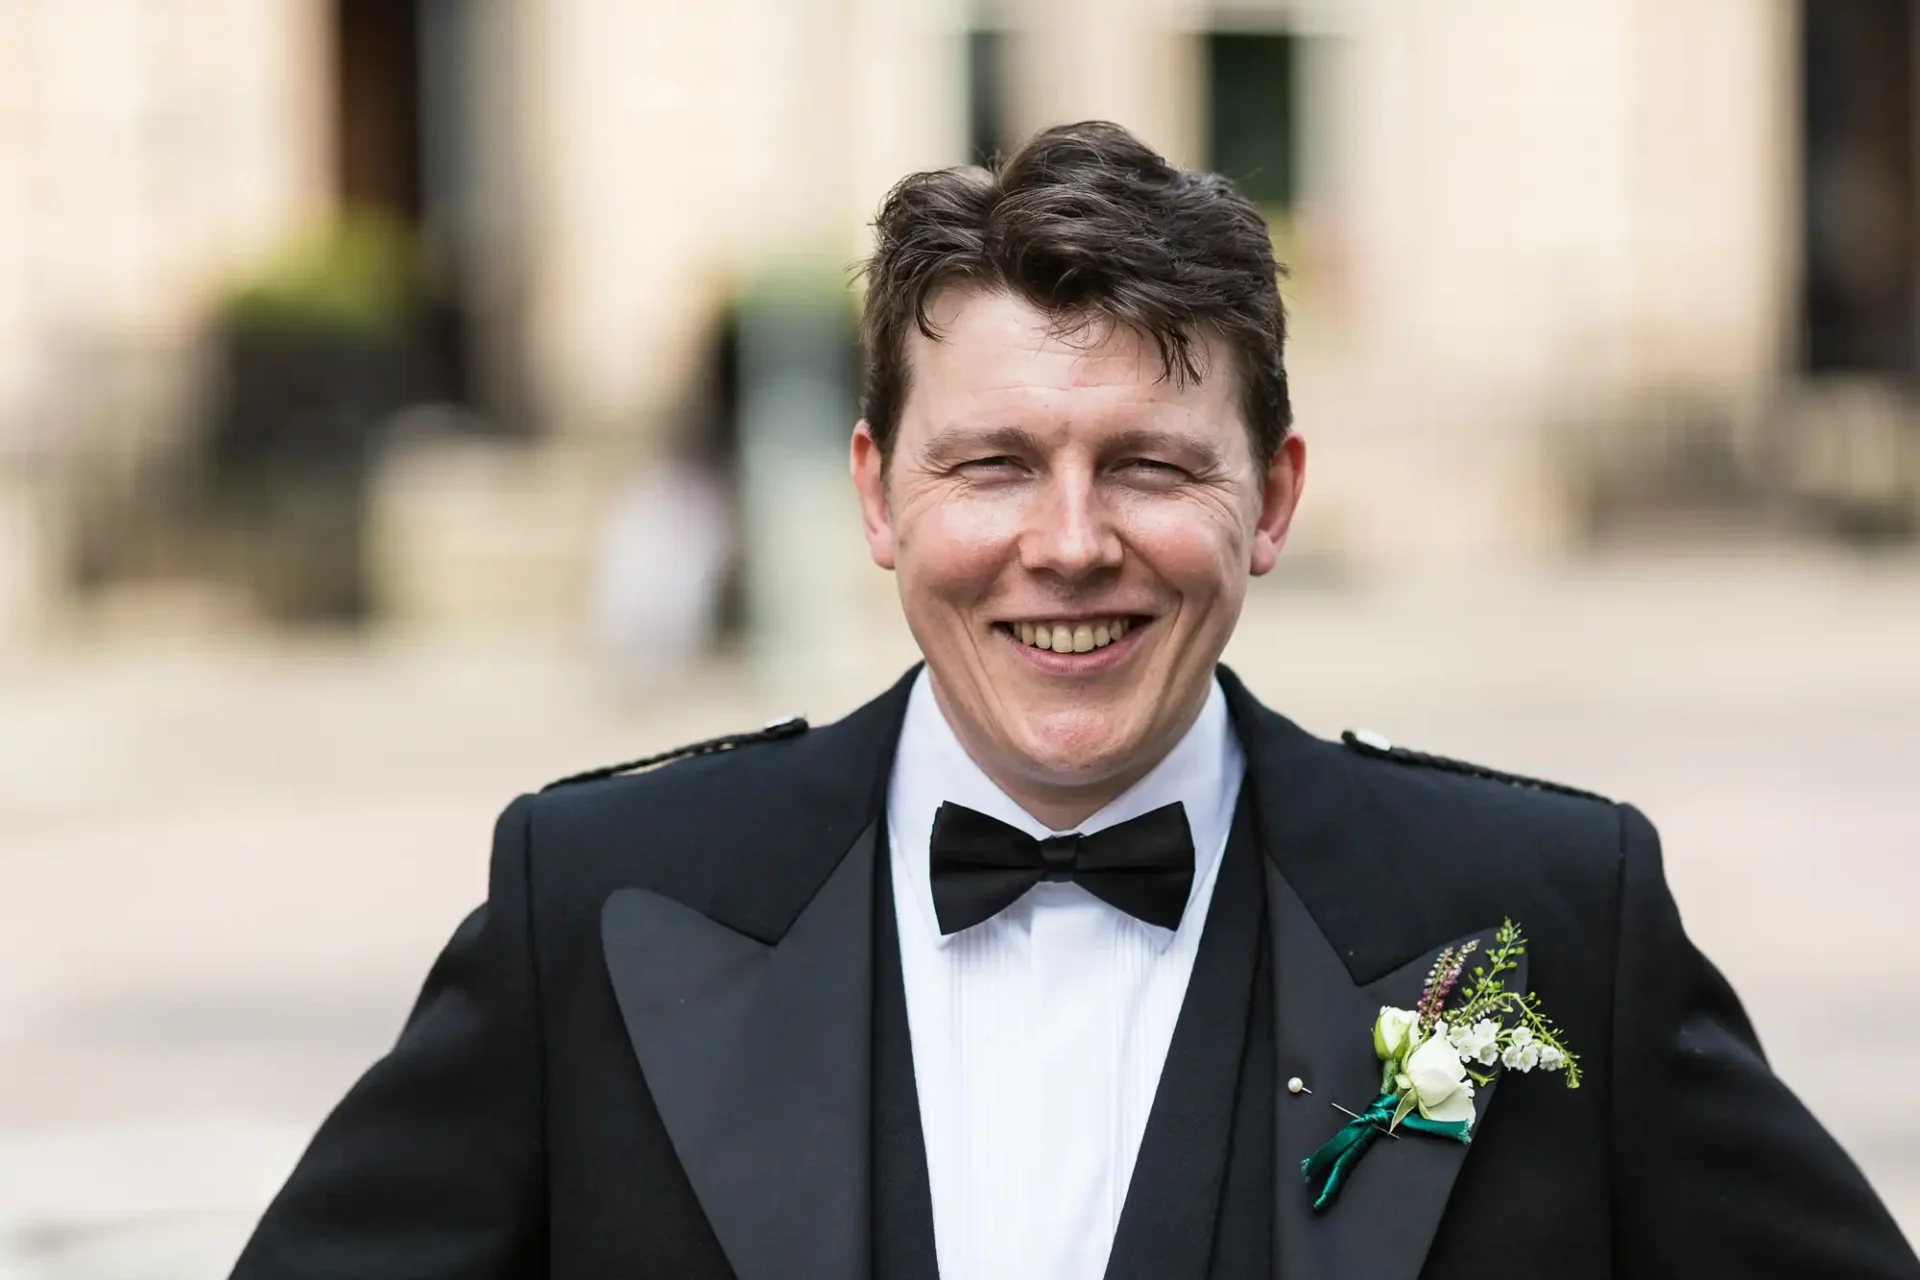 A smiling man in a black tuxedo and bow tie with a boutonniere on his lapel, standing outdoors.